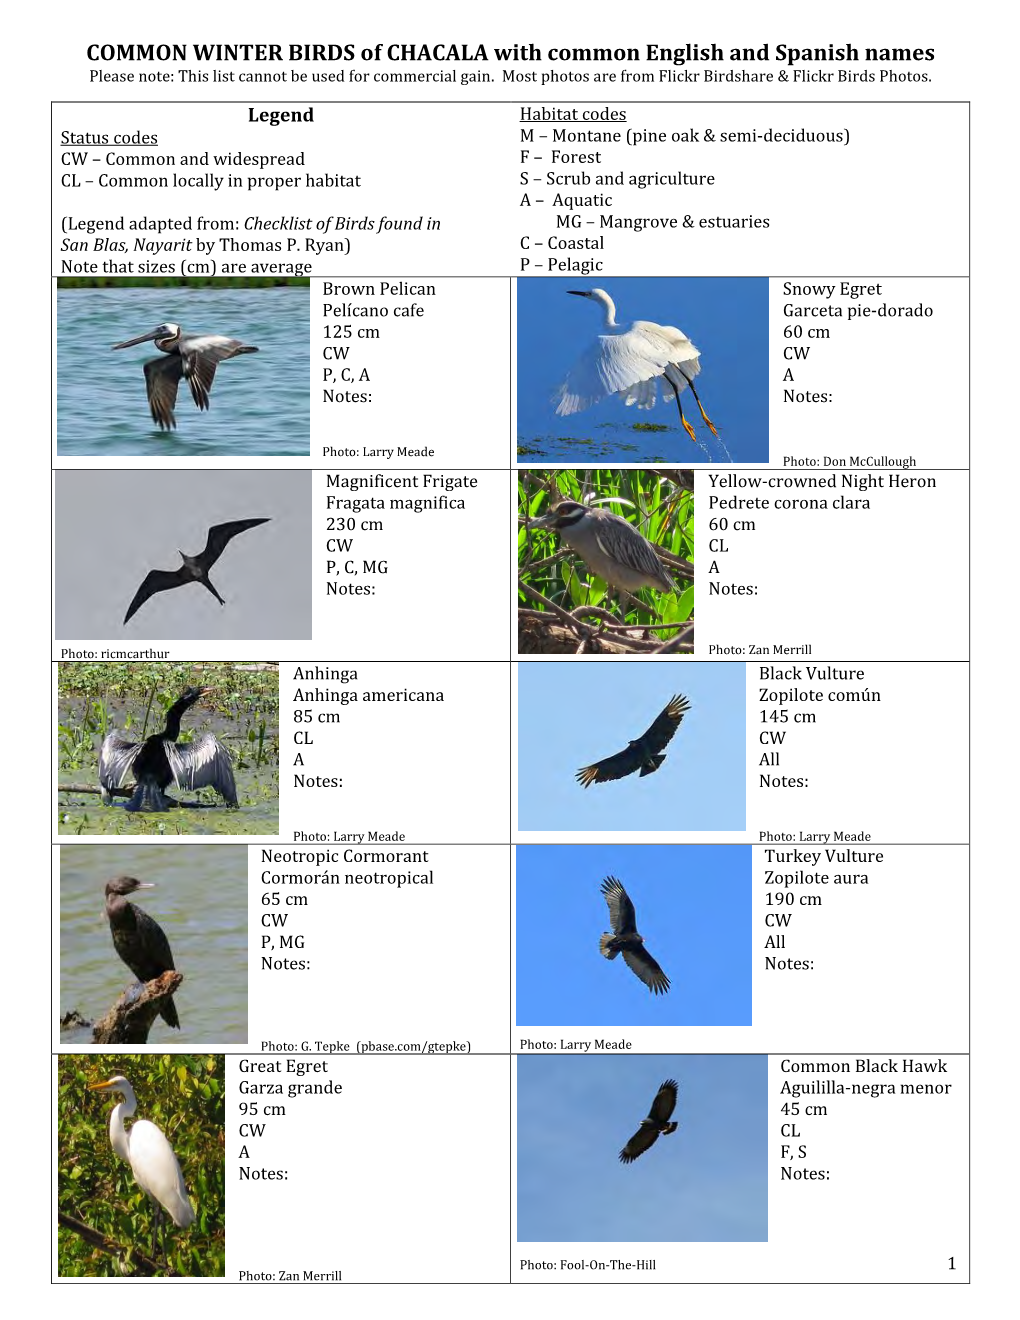 COMMON WINTER BIRDS of CHACALA with Common English and Spanish Names Please Note: This List Cannot Be Used for Commercial Gain